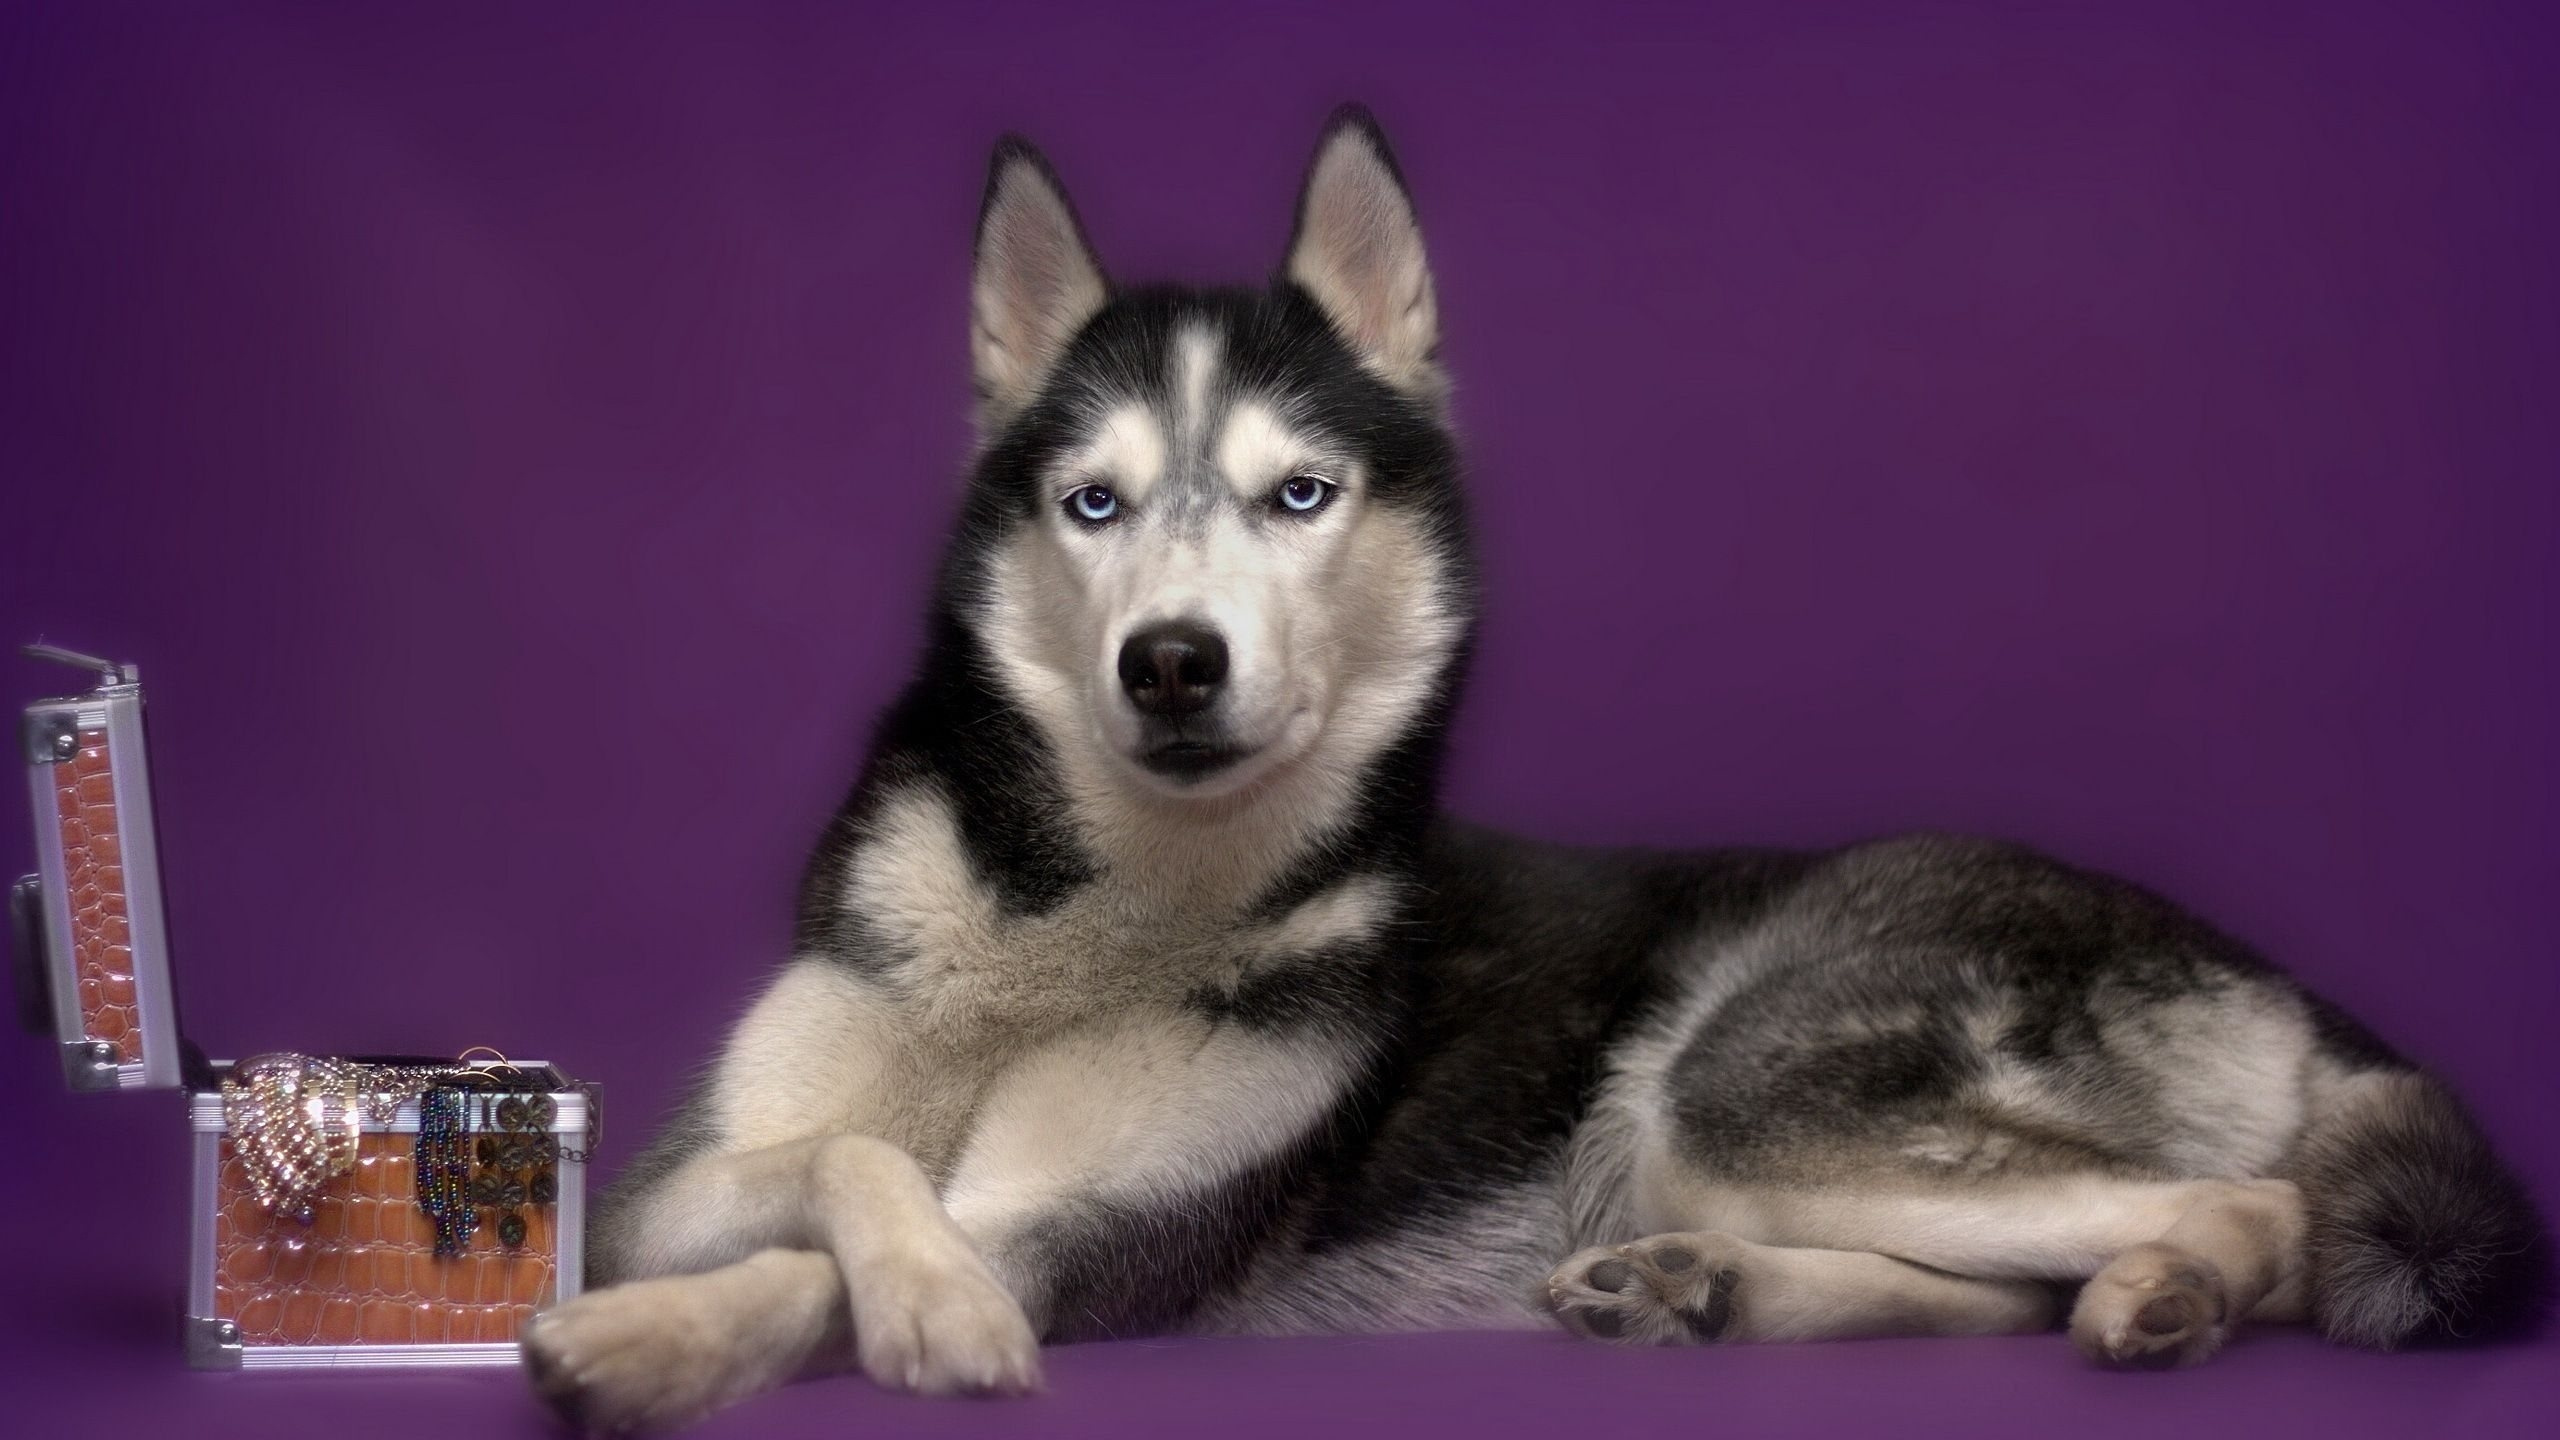 Black and White Siberian Husky Puppy. Wallpaper in 2560x1440 Resolution